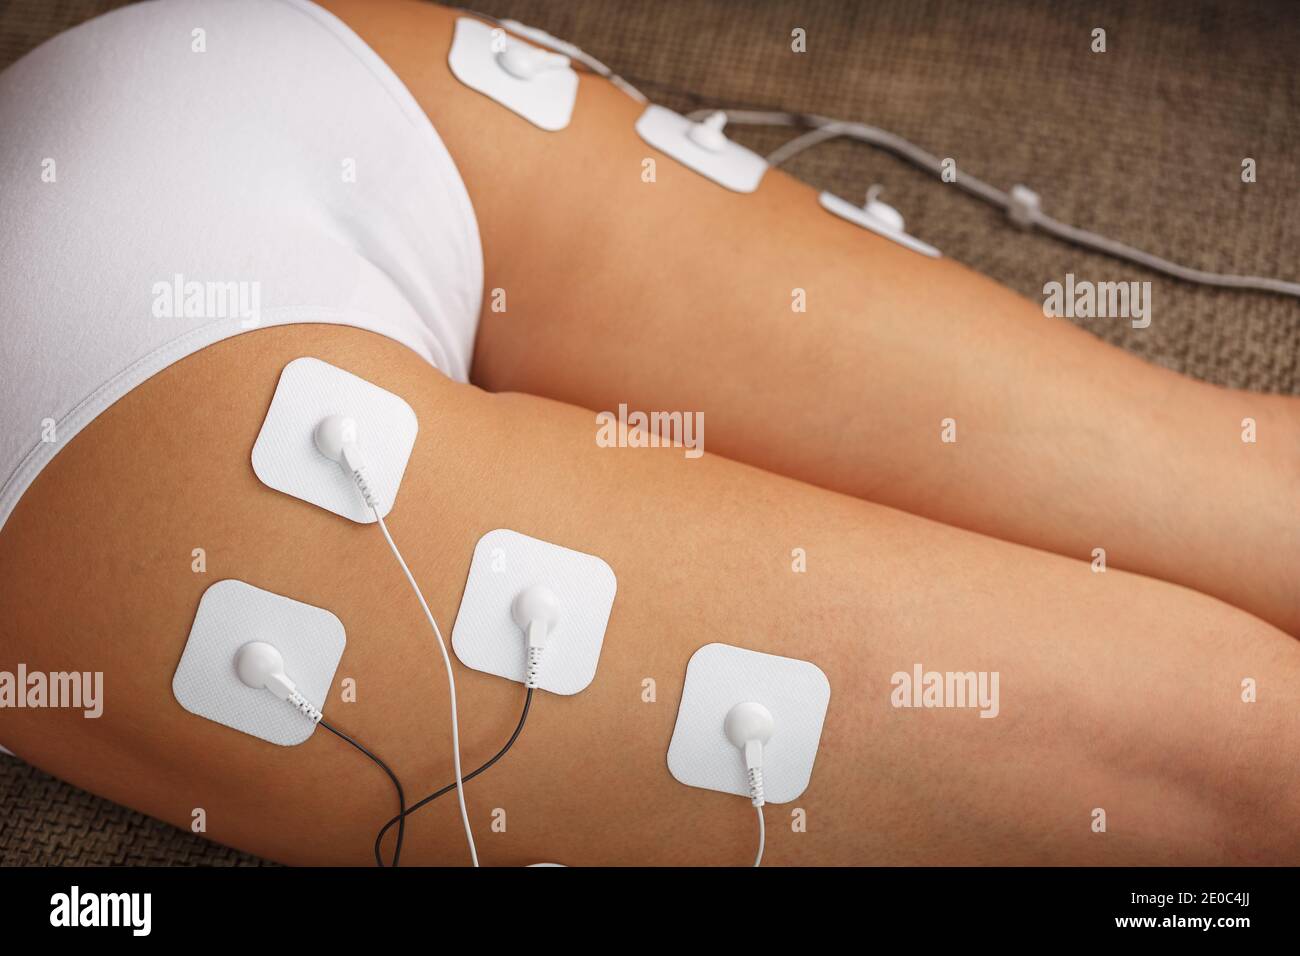 https://c8.alamy.com/comp/2E0C4JJ/muscle-stimulator-with-electrodes-the-massager-on-the-buttocks-and-legs-rehabilitation-and-treatment-weight-loss-and-2E0C4JJ.jpg